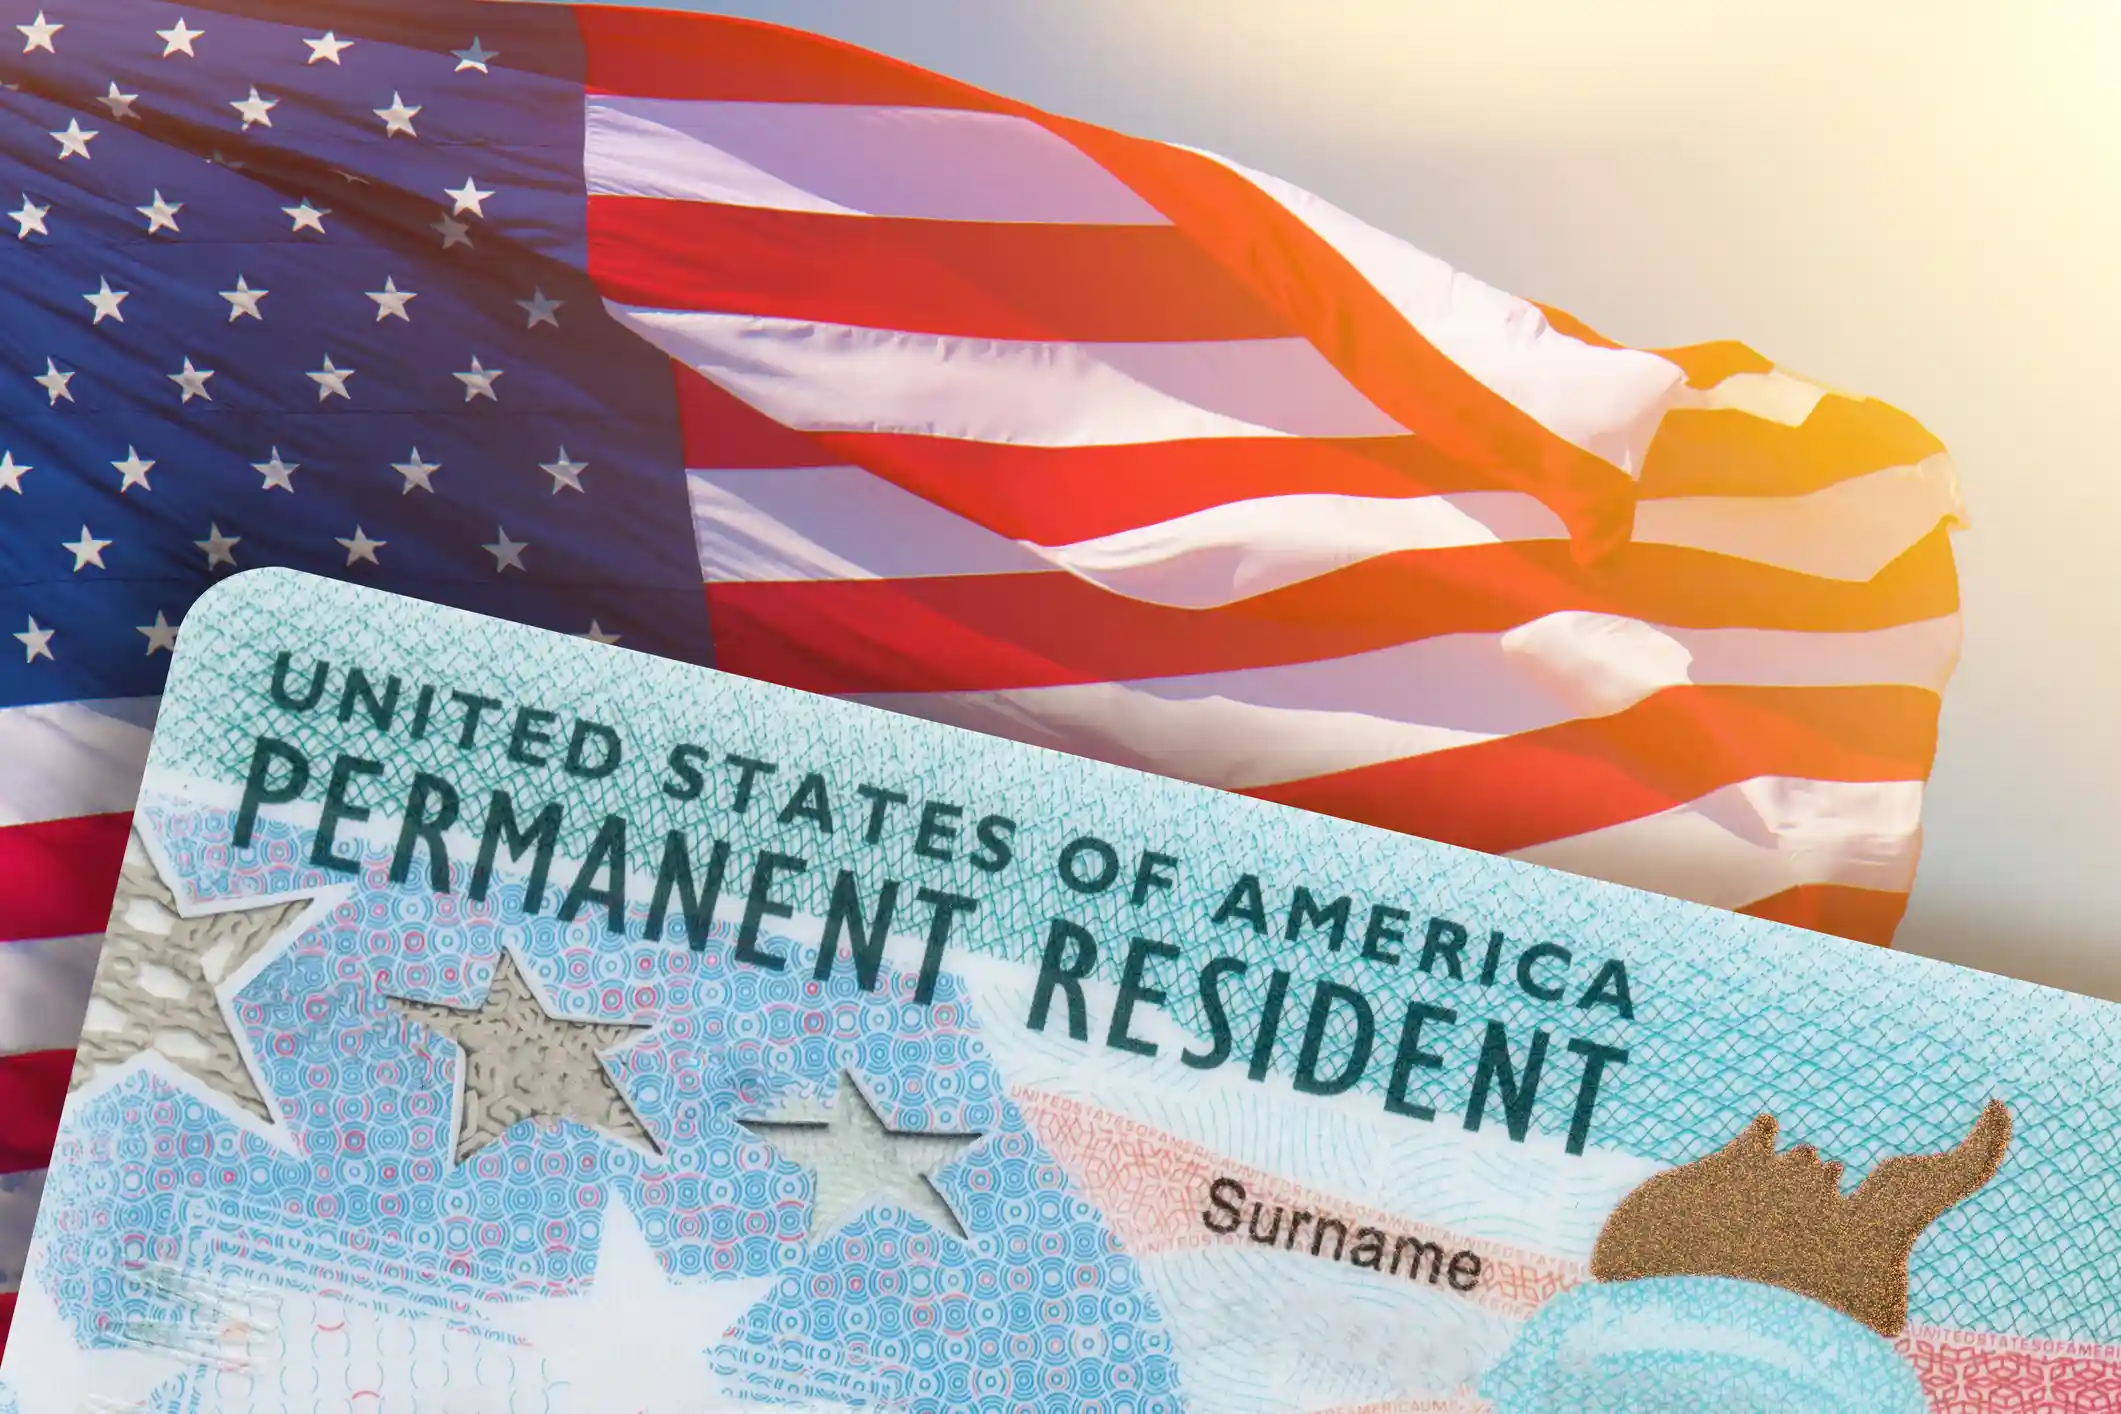 How to Get a Green Card?